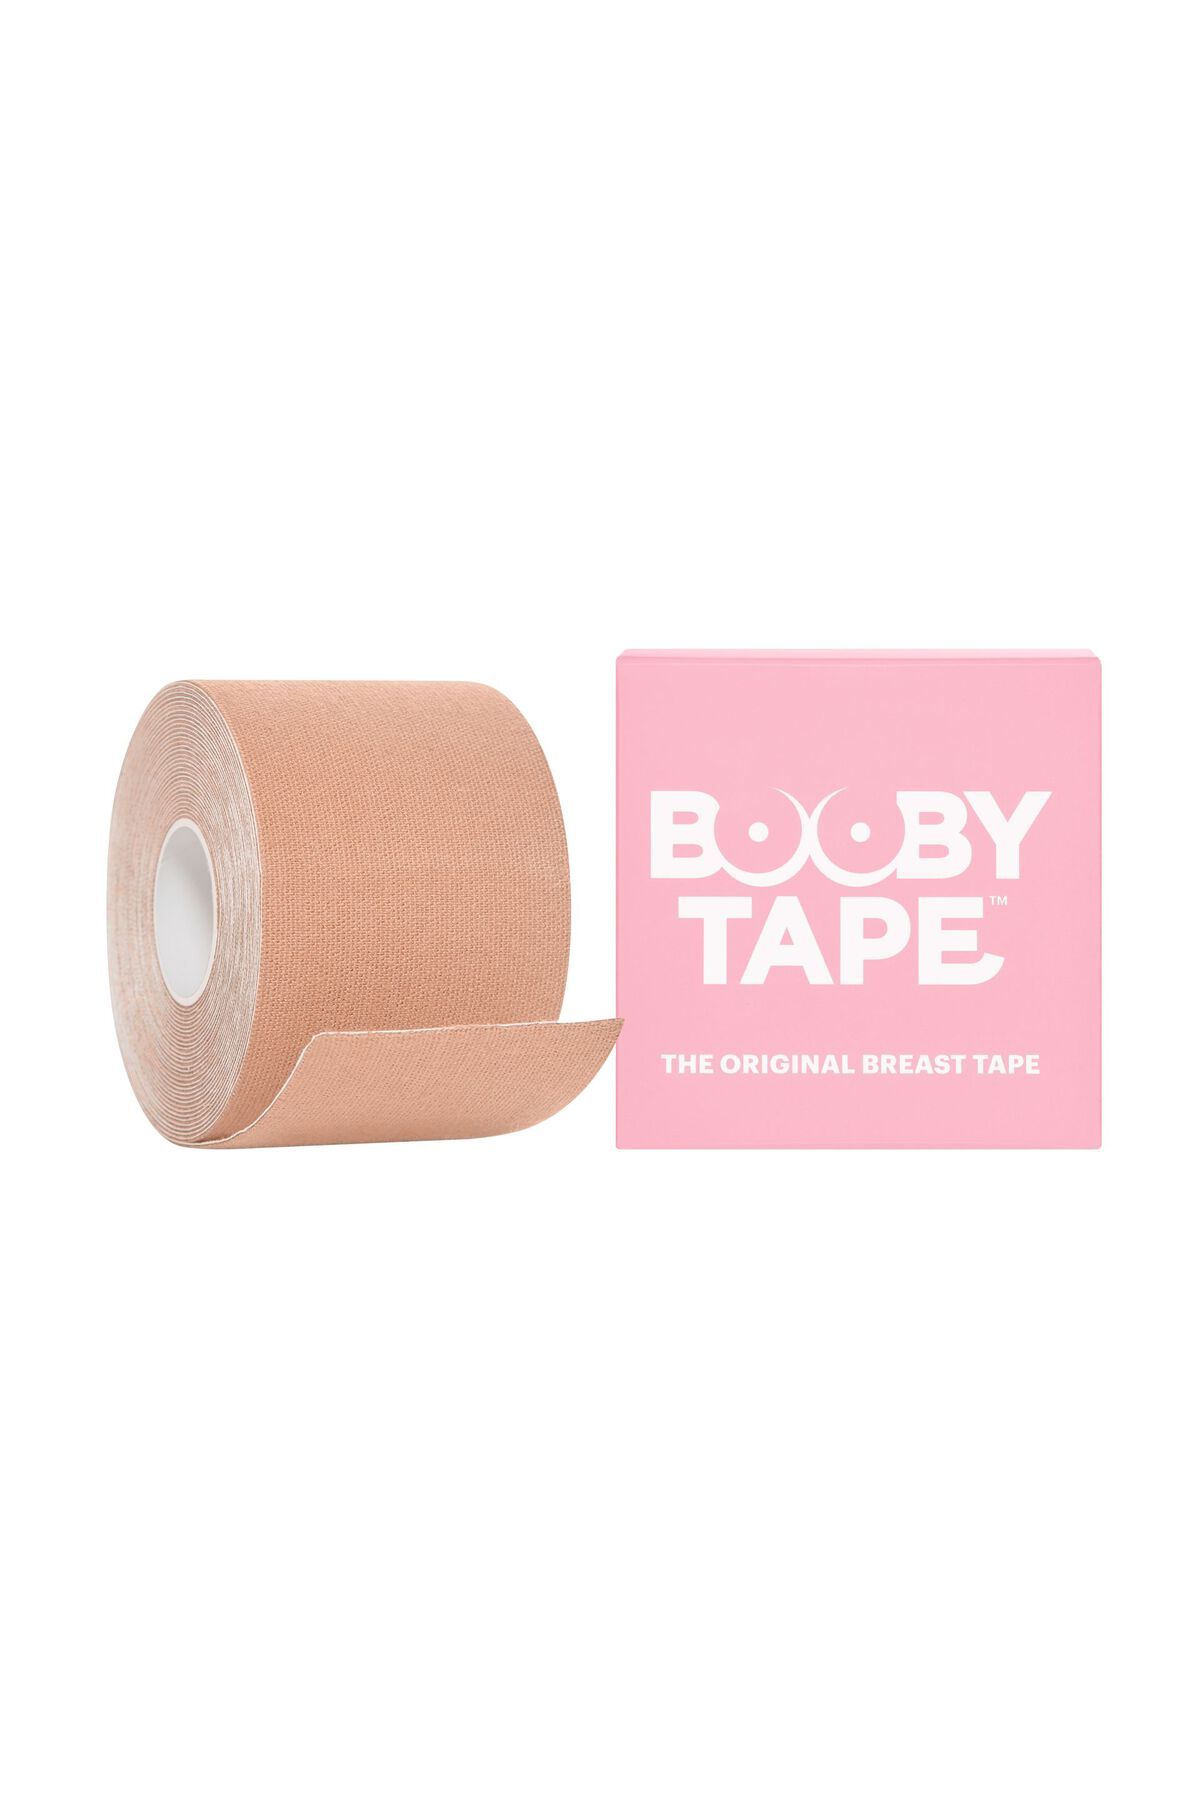 Booby Tape - The Original Breast Tape for Women, Latex-Free and Waterproof  Body Tape for Breast, Painless and Reliable Bra Tape for All Bust Sizes,  White, 5-Meter Roll : : Clothing, Shoes